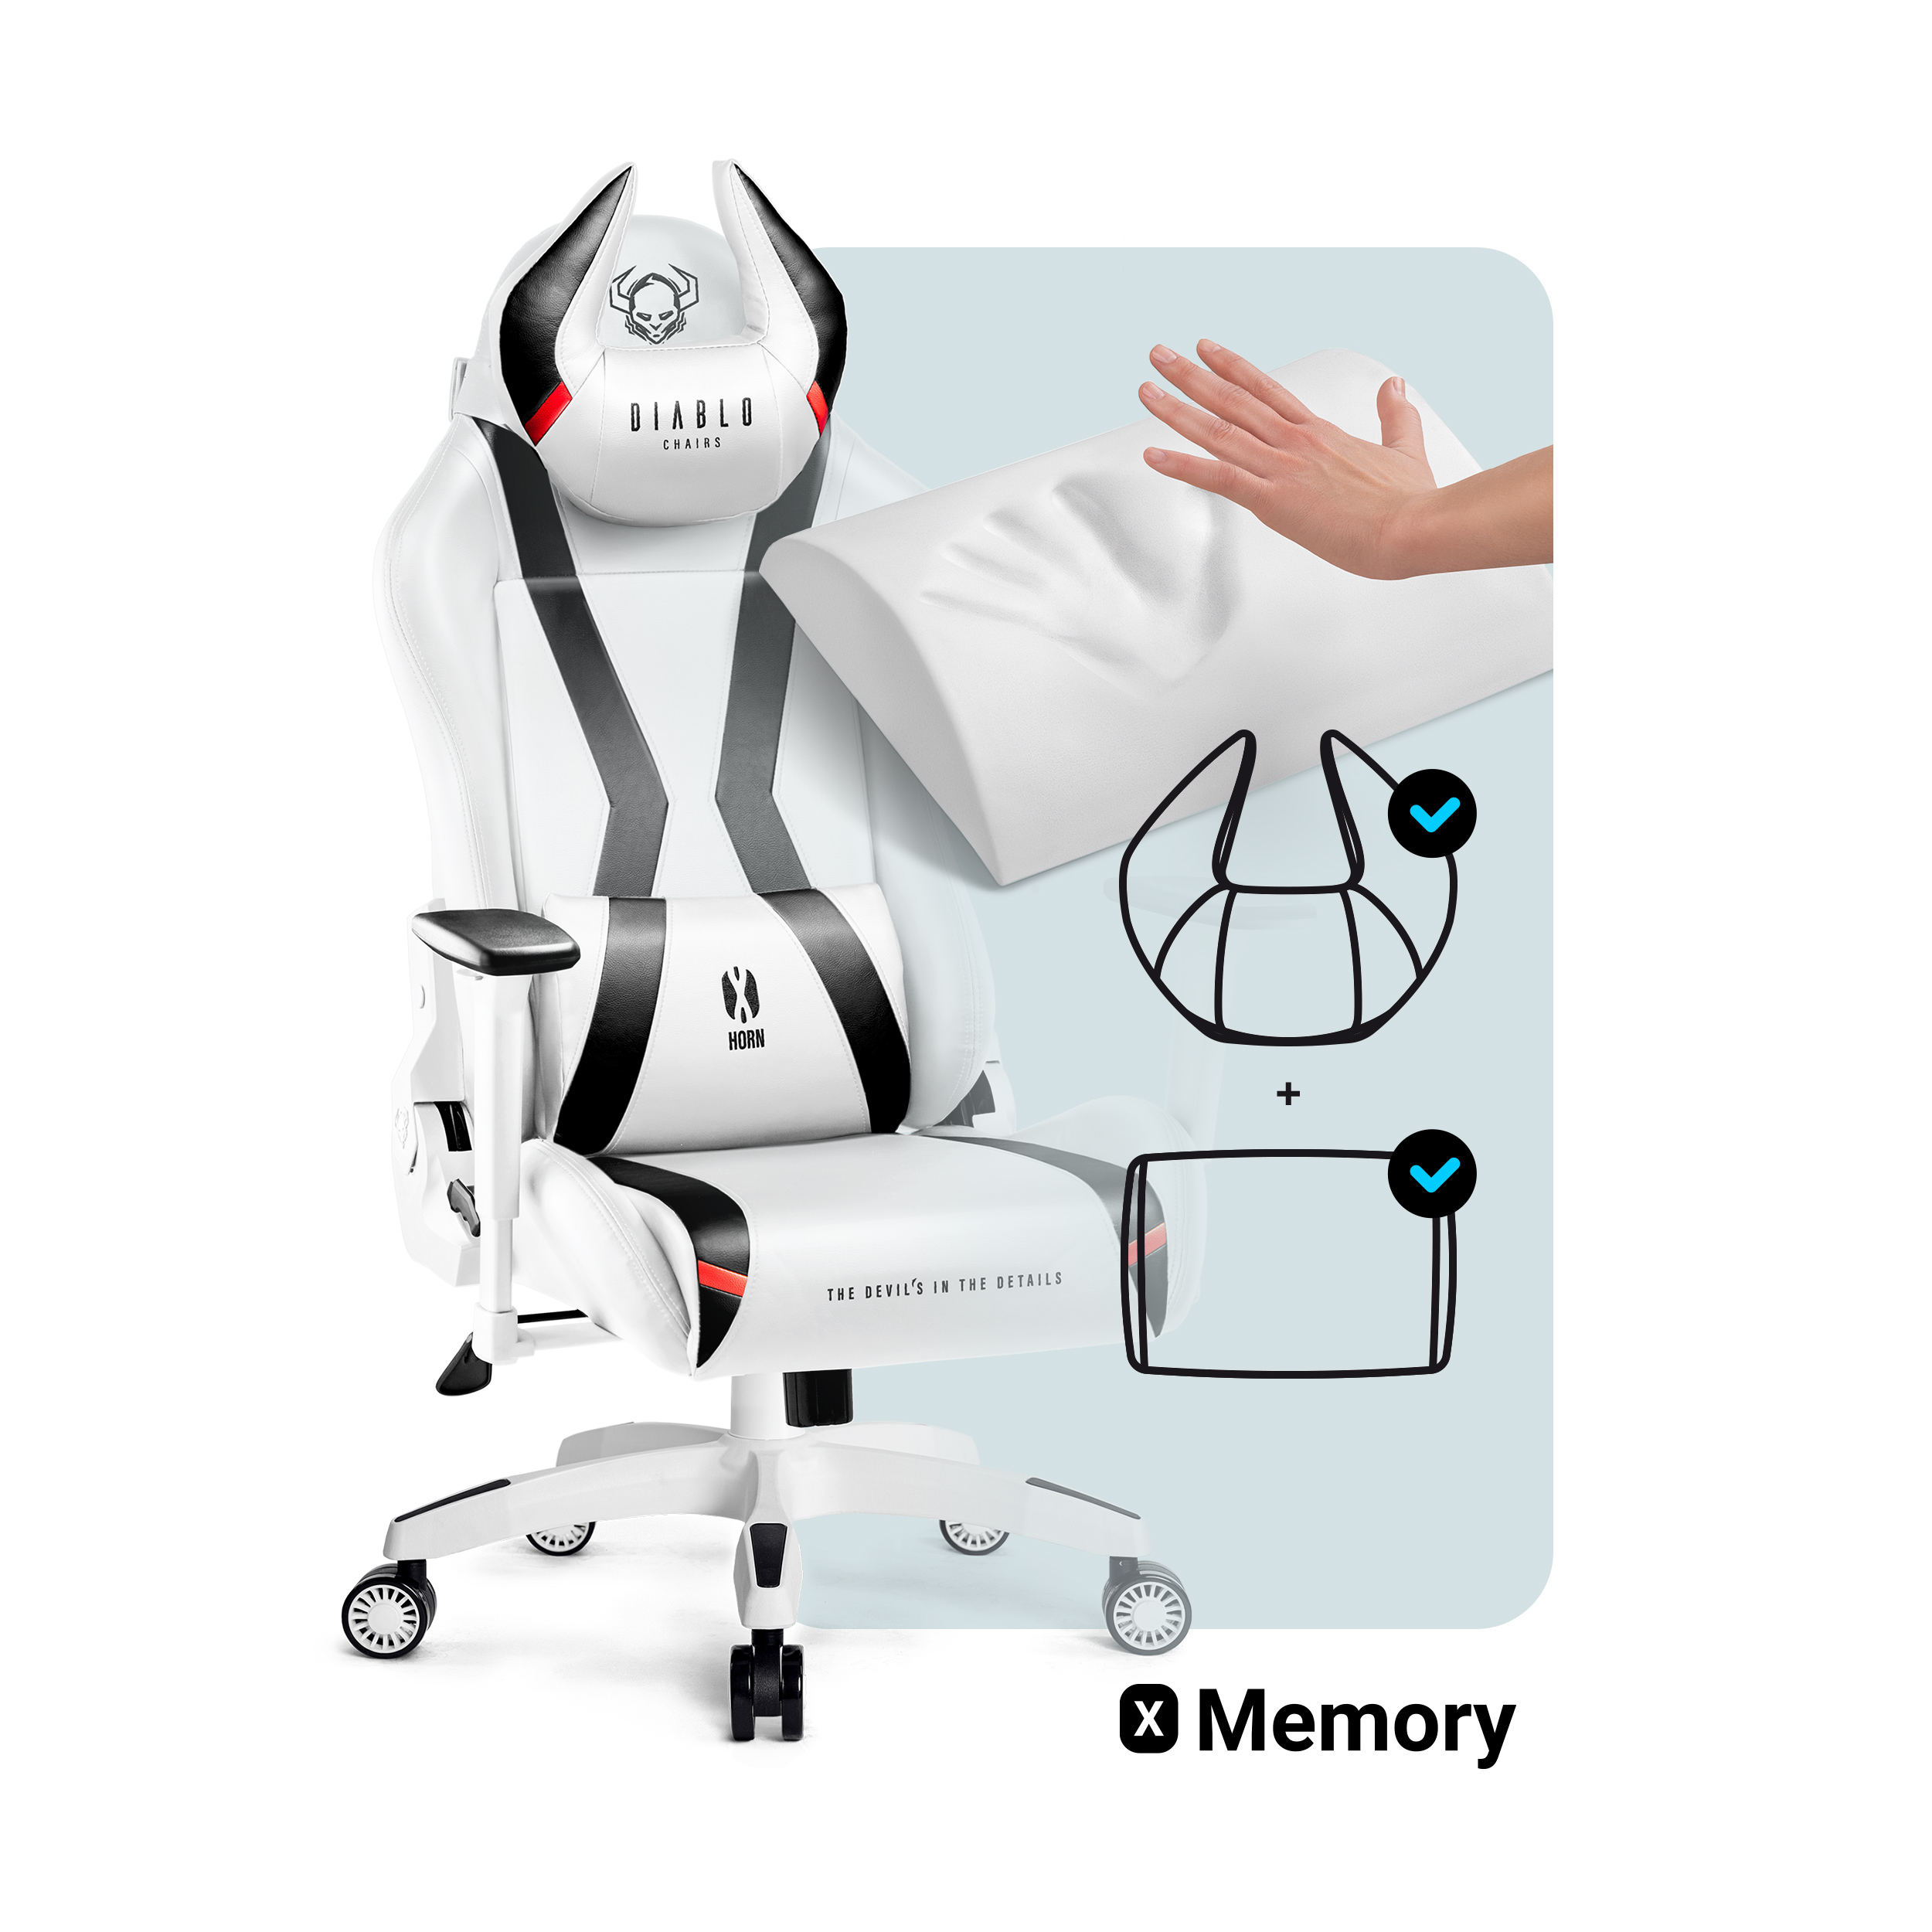 white GAMING STUHL Chair, CHAIRS X-HORN DIABLO Gaming 2.0 NORMAL